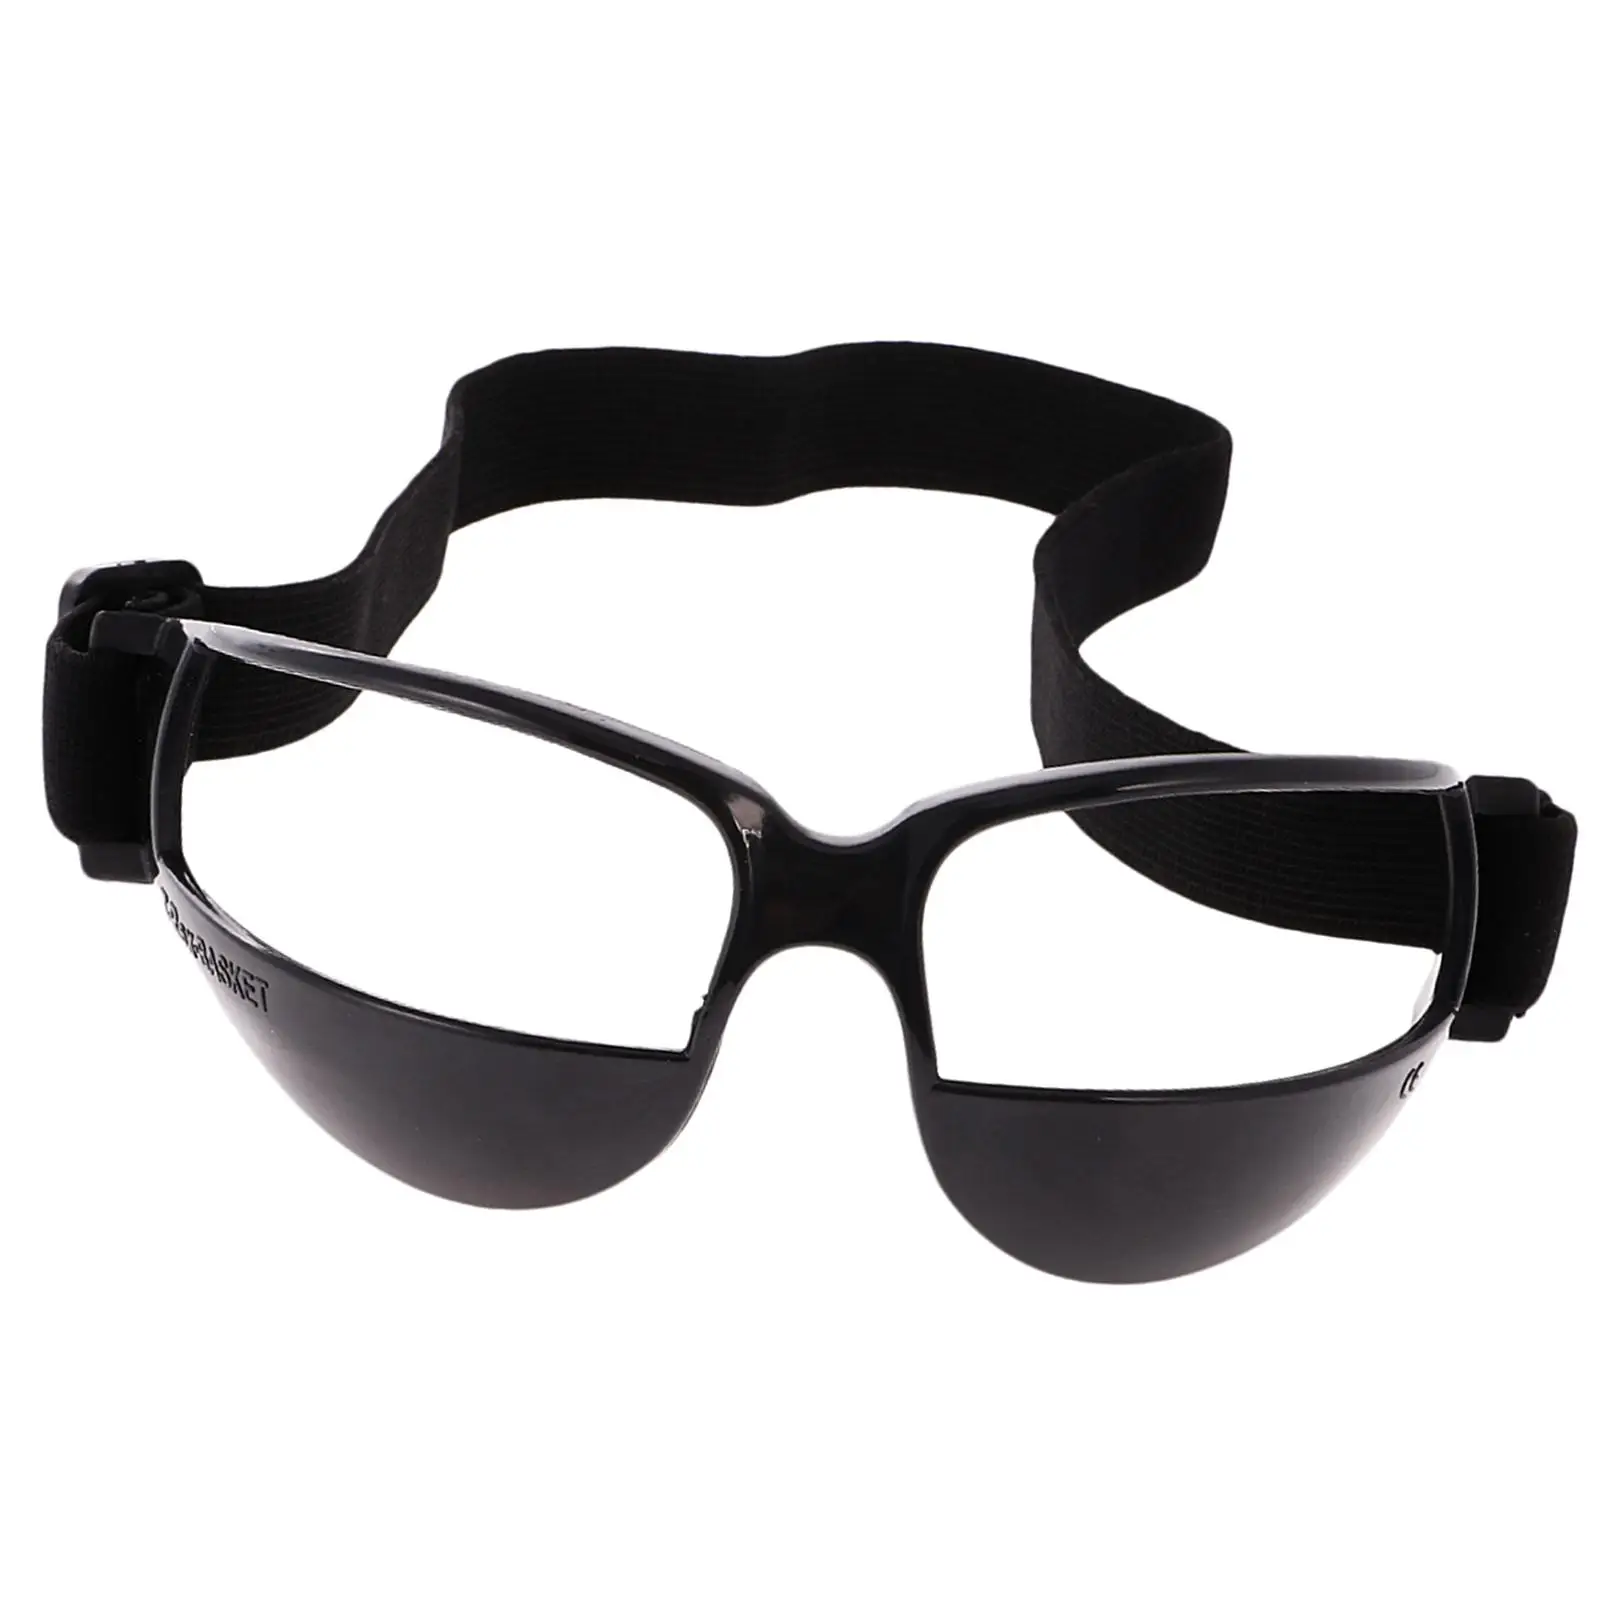 12 Pieces Professional Basketball Dribble Dribbling Goggles Specs Training Glasses - Black